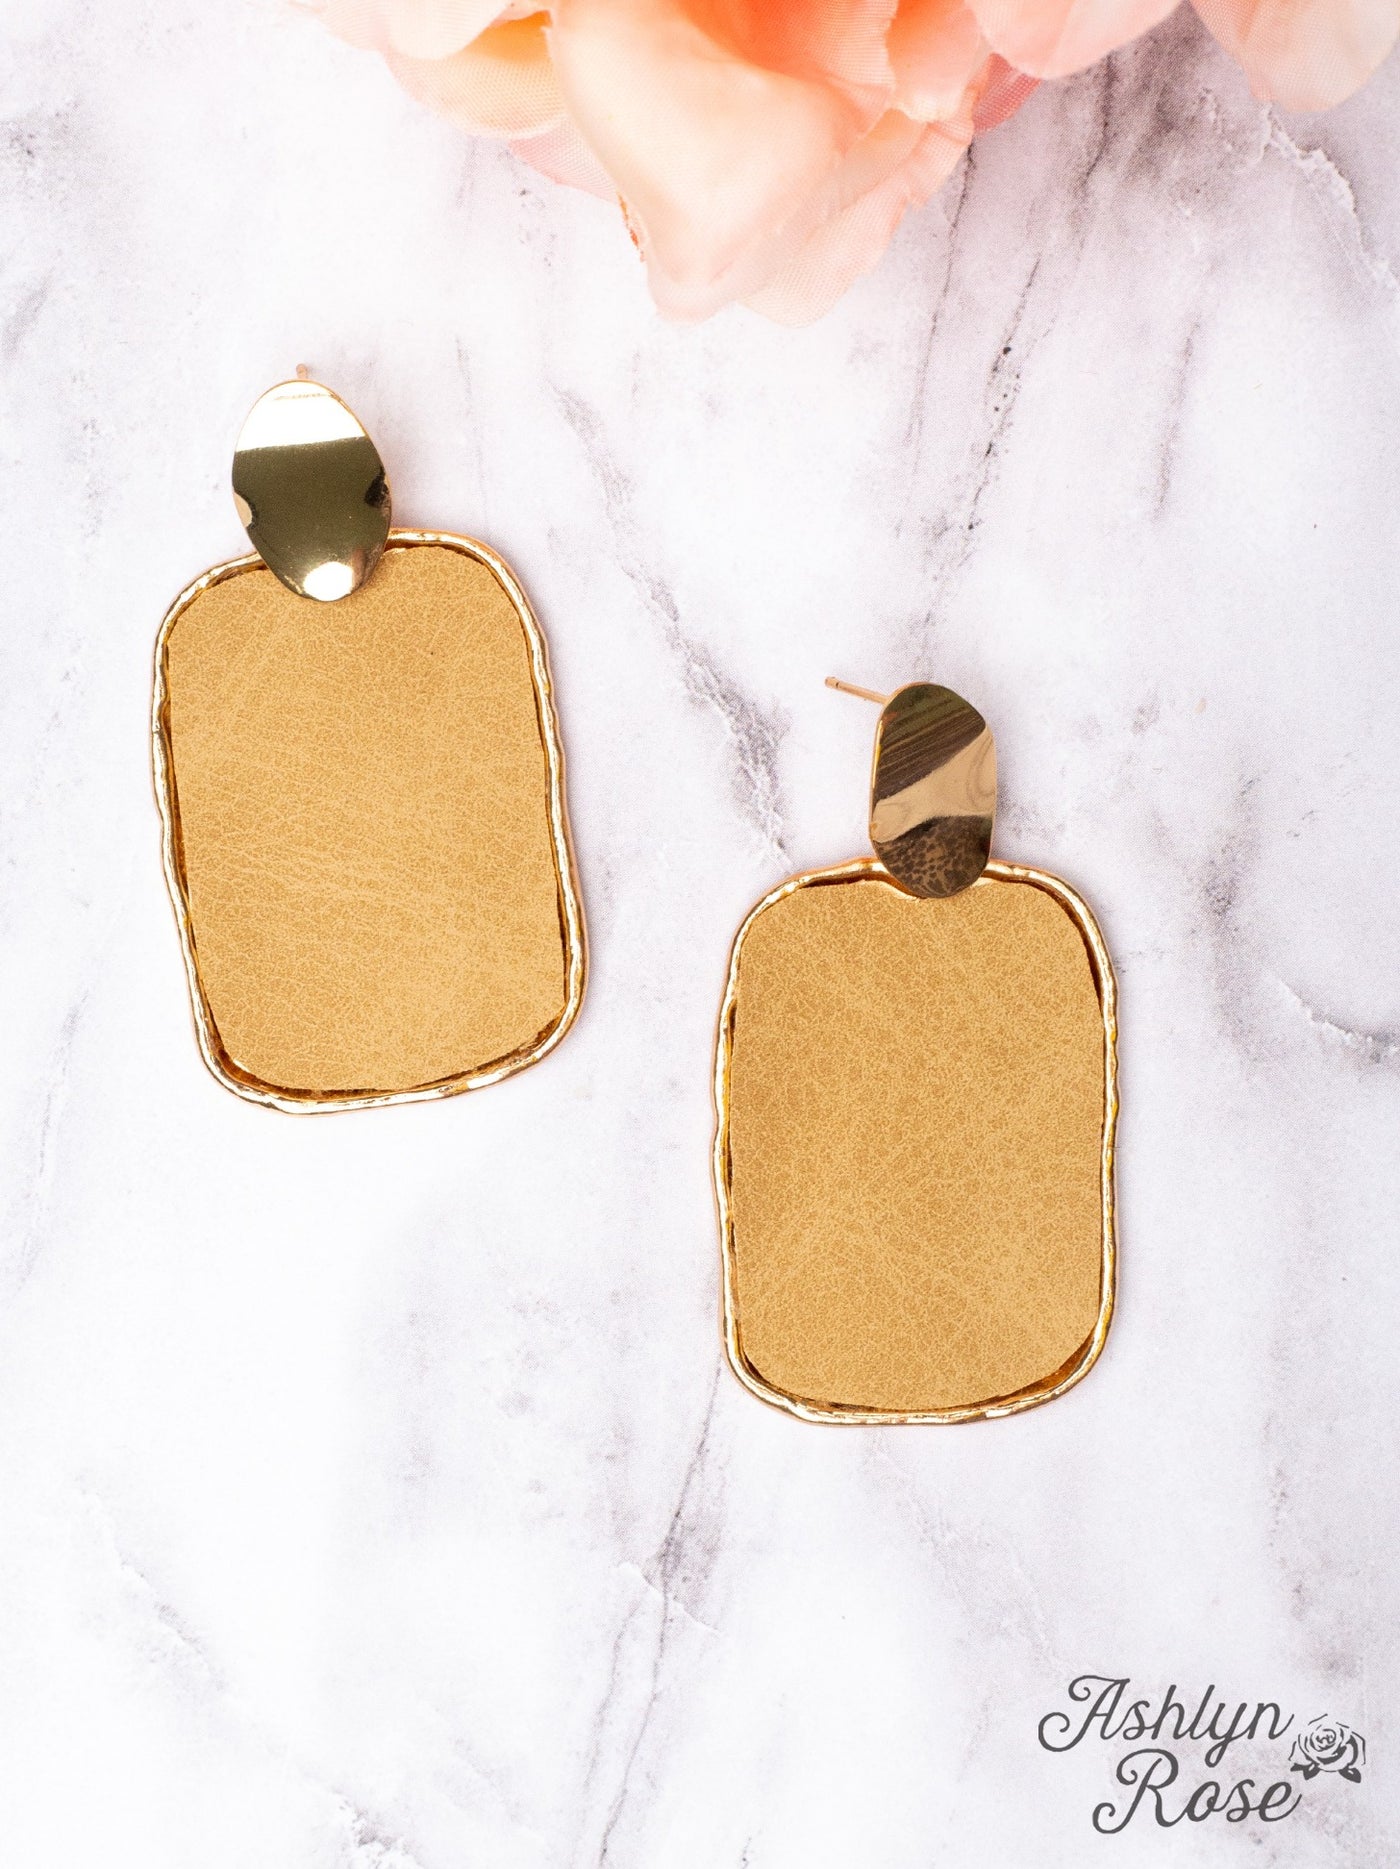 ONLY IN L.A TAN FAUX LEATHER SQUARE STUD EARRINGS